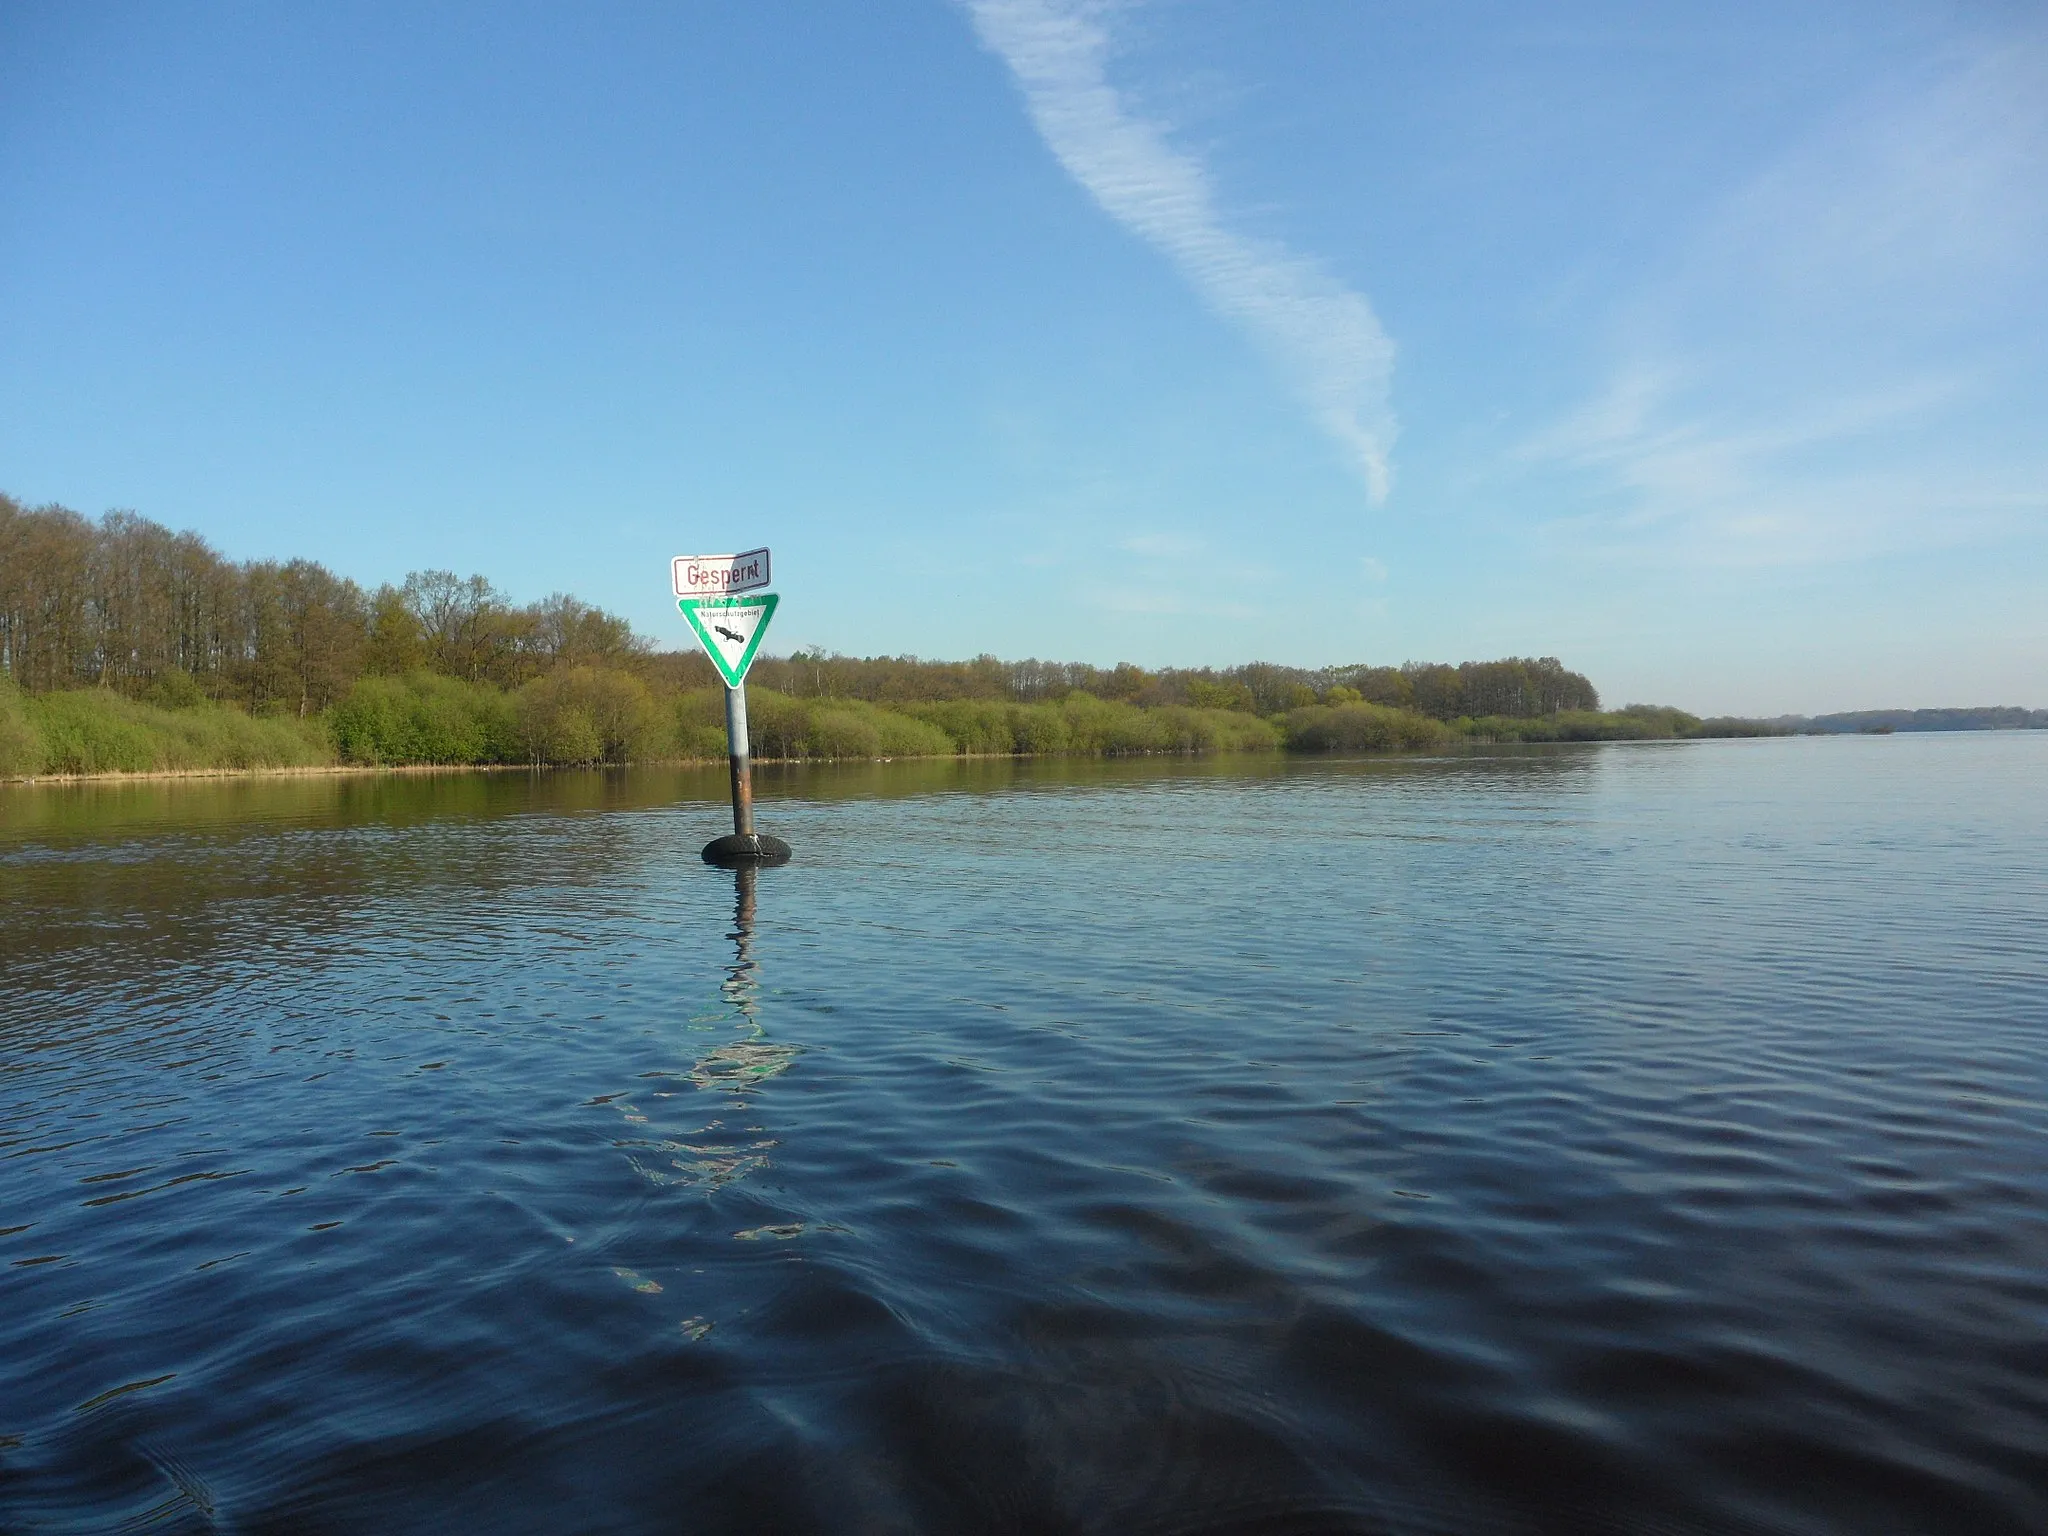 Photo showing: The Nature reserve "Westufer Einfelder See" is marked by signs on the lake